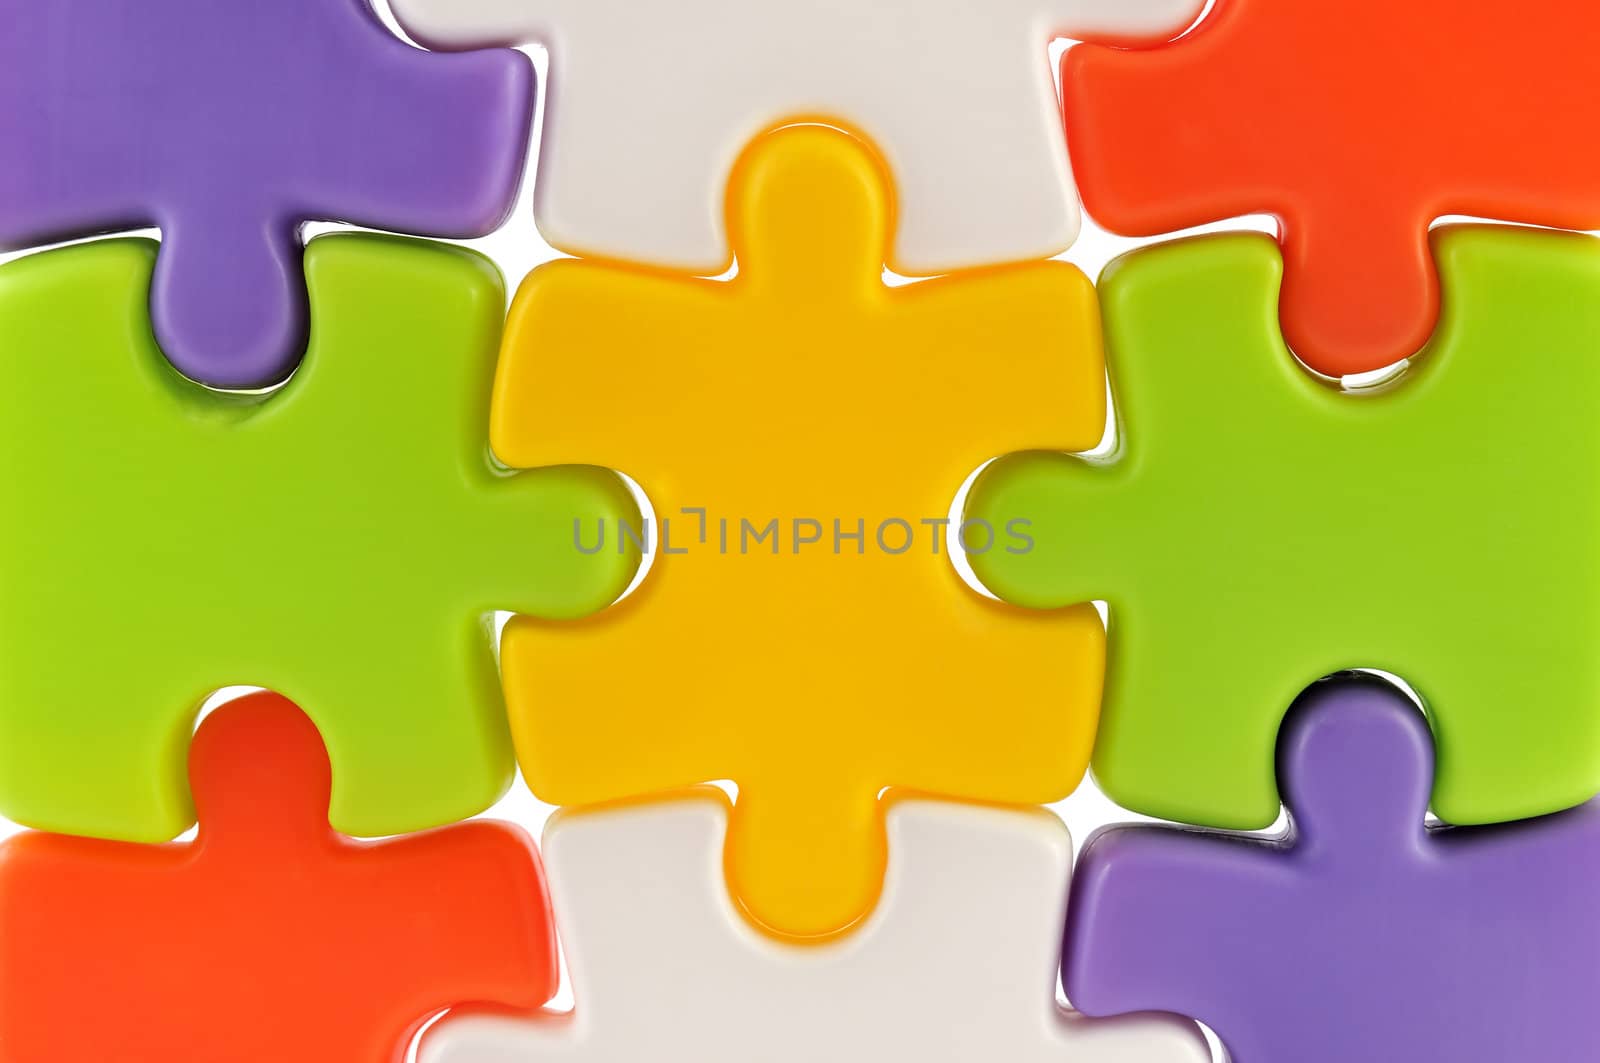 Nine colorful puzzle pieces together